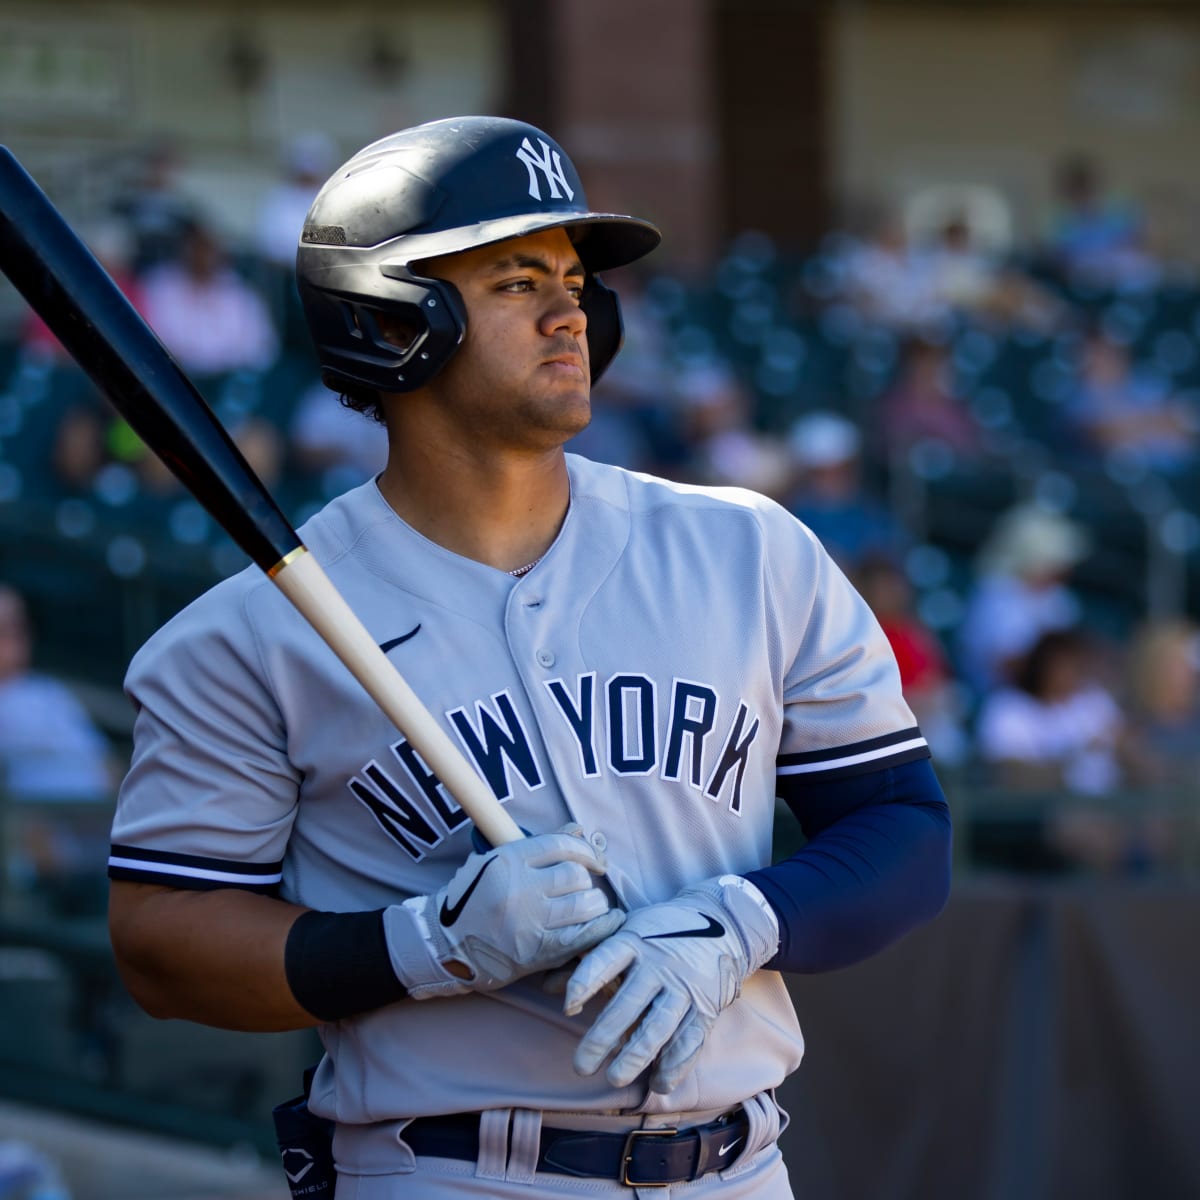 MLB Yankees Top prospect called up to the Majors